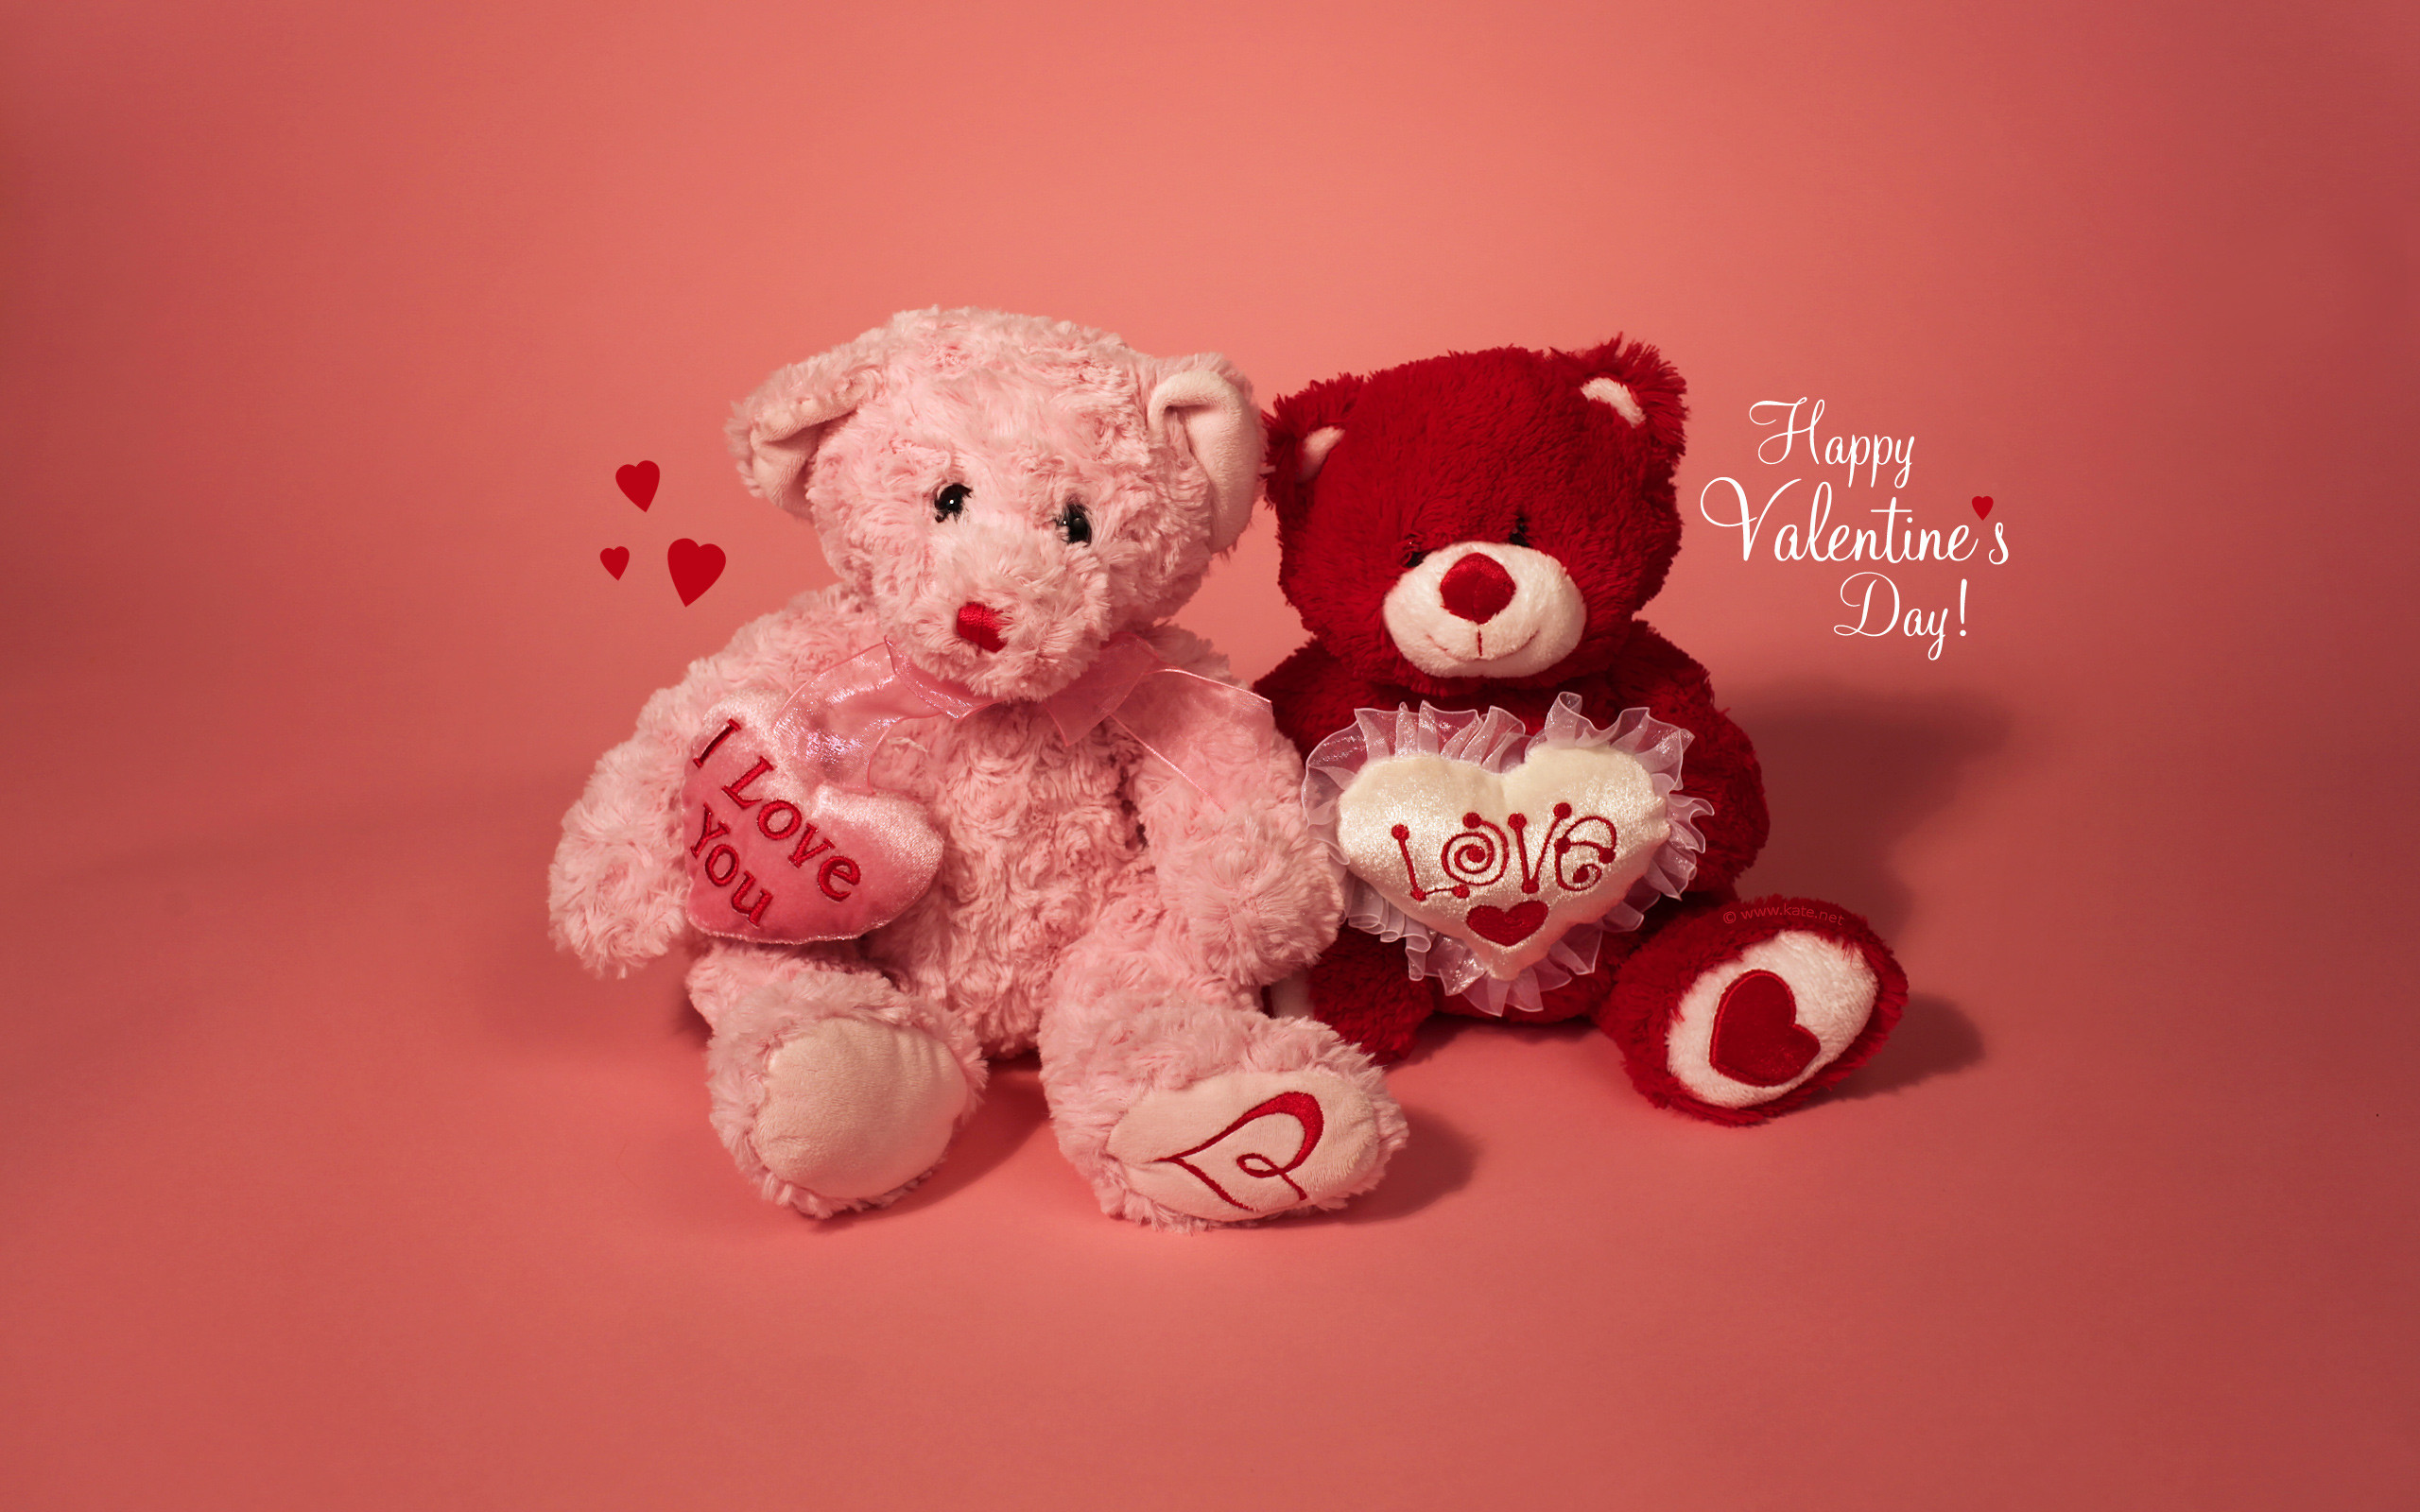 2560x1600 Cute and Romantic Teddy Bear Wallpaper for Happy Valentine's Day - HD  Wallpapers for Free